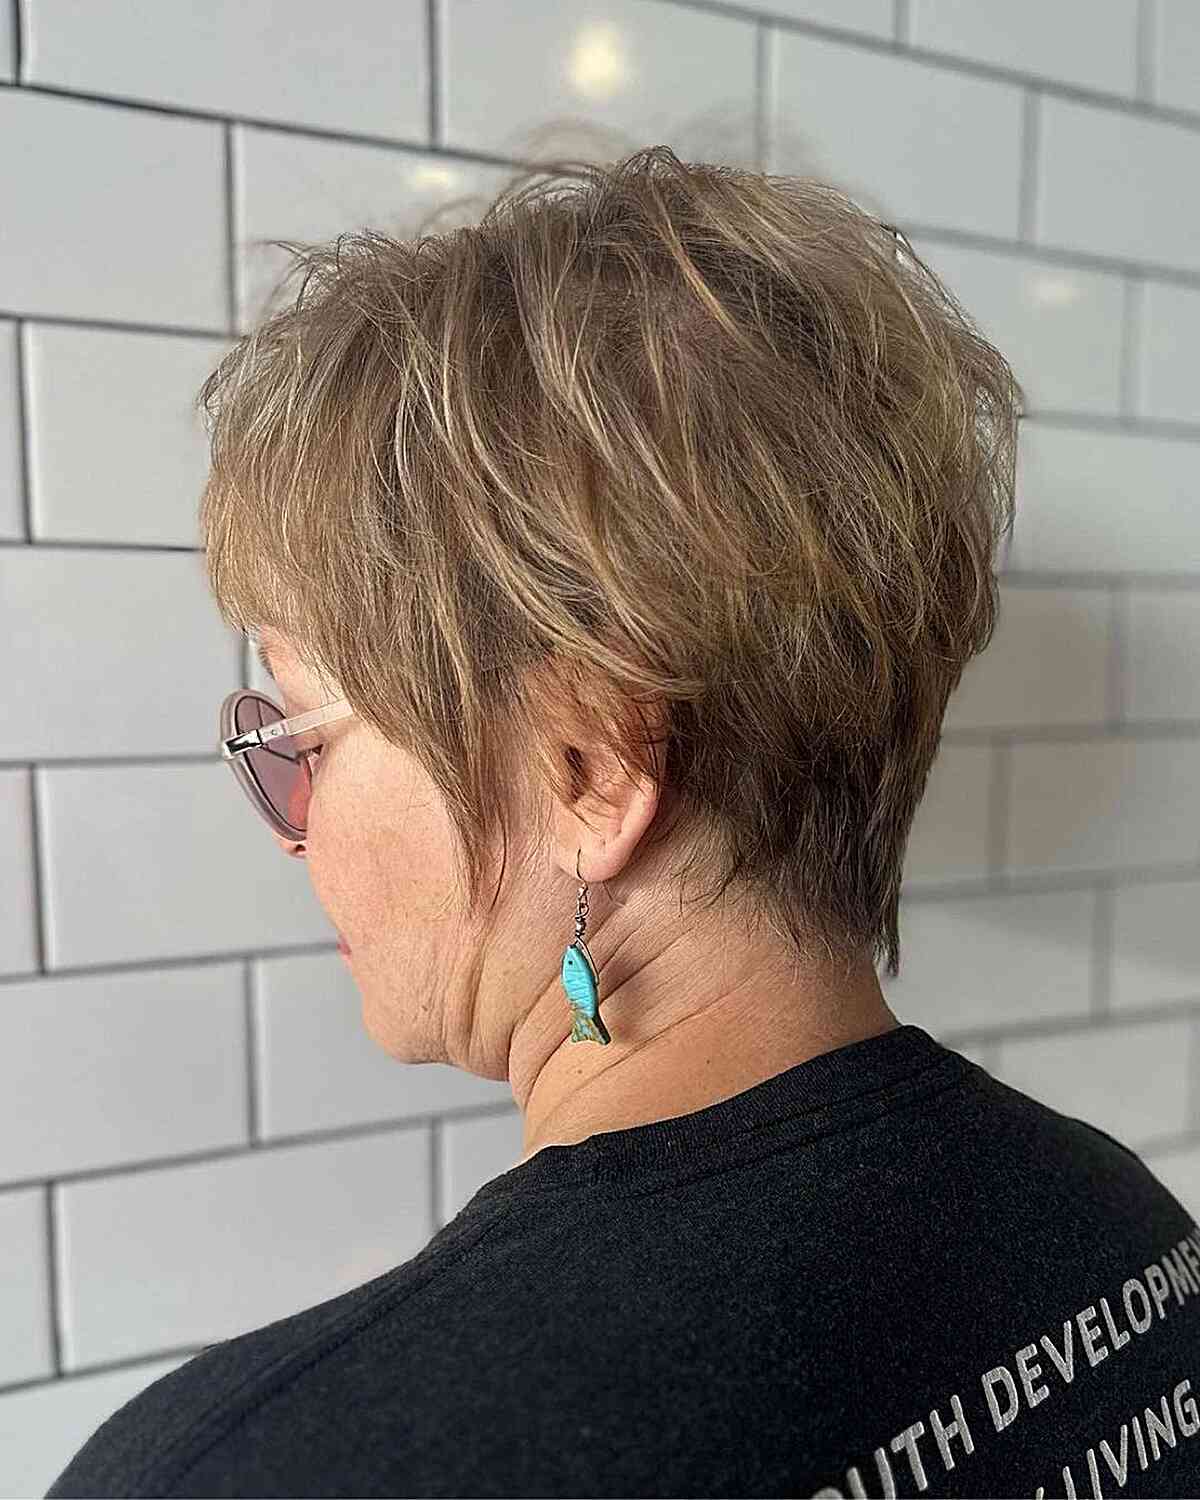 Straight Messy Pixie with Choppy Thin Layers for Older Women Over 60